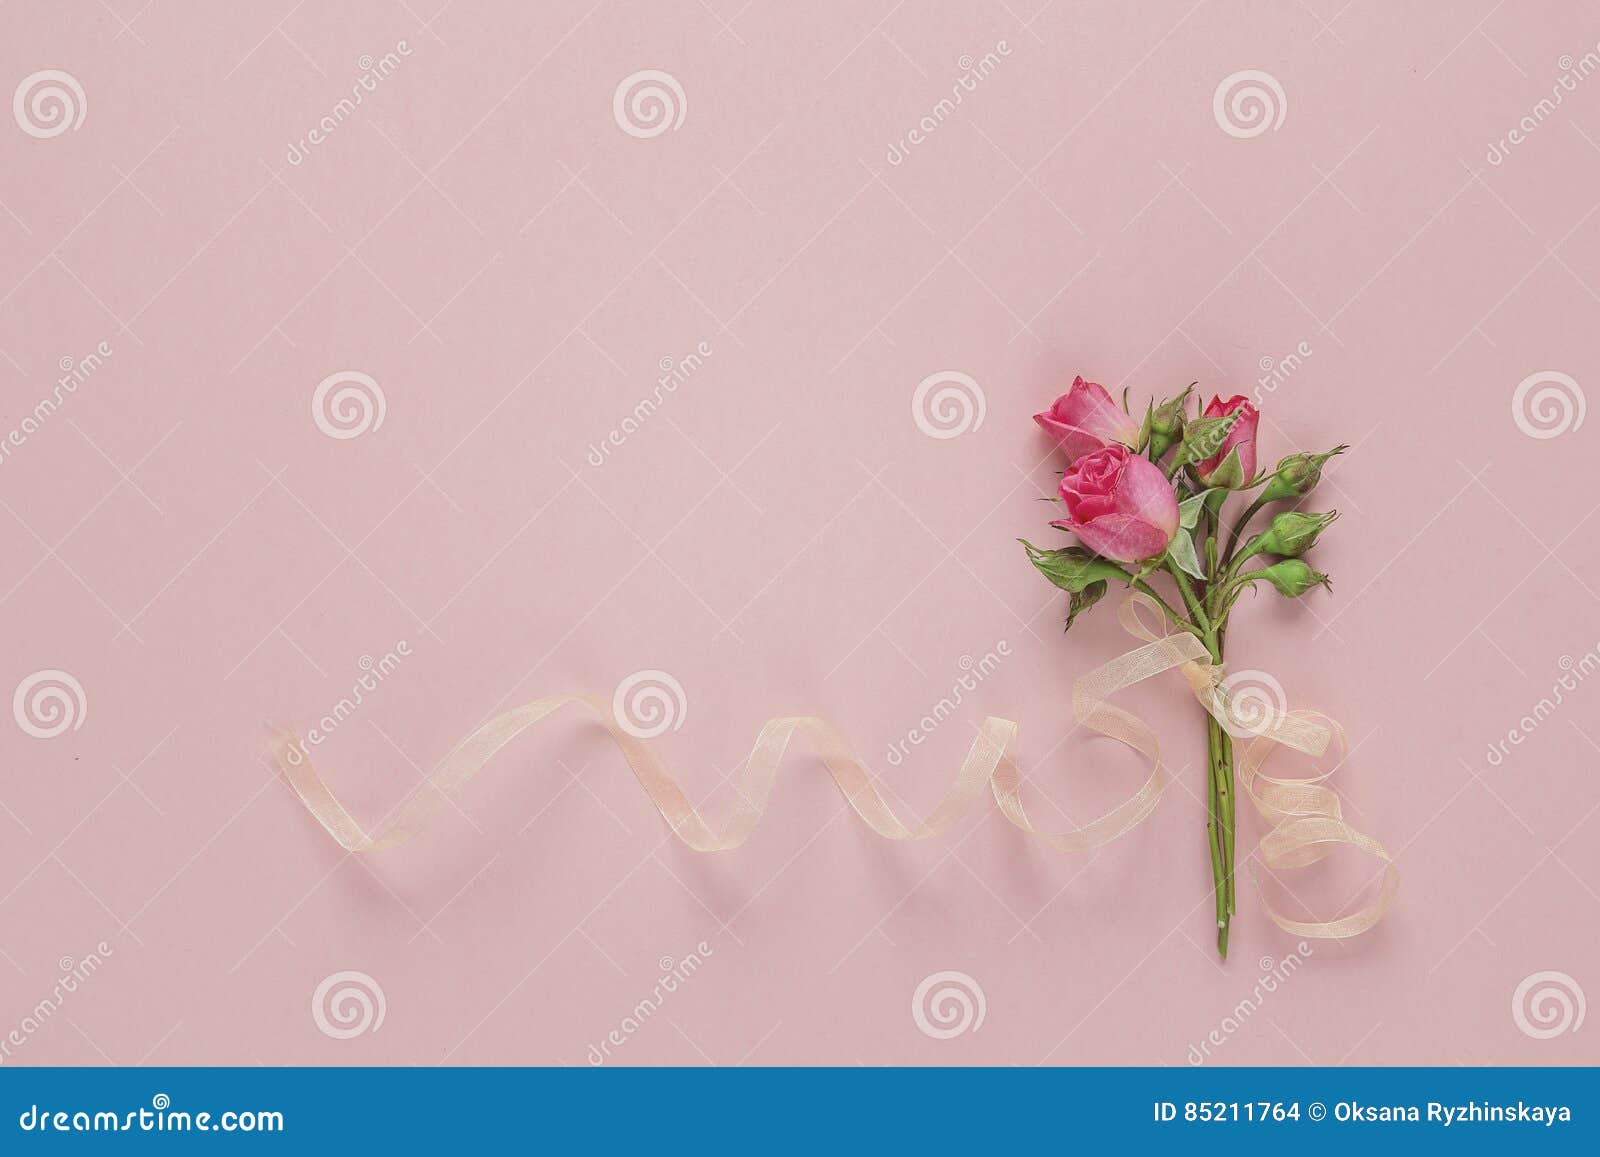 Small Bouquet of Roses on a Pink Background. Space for Text. Stock ...